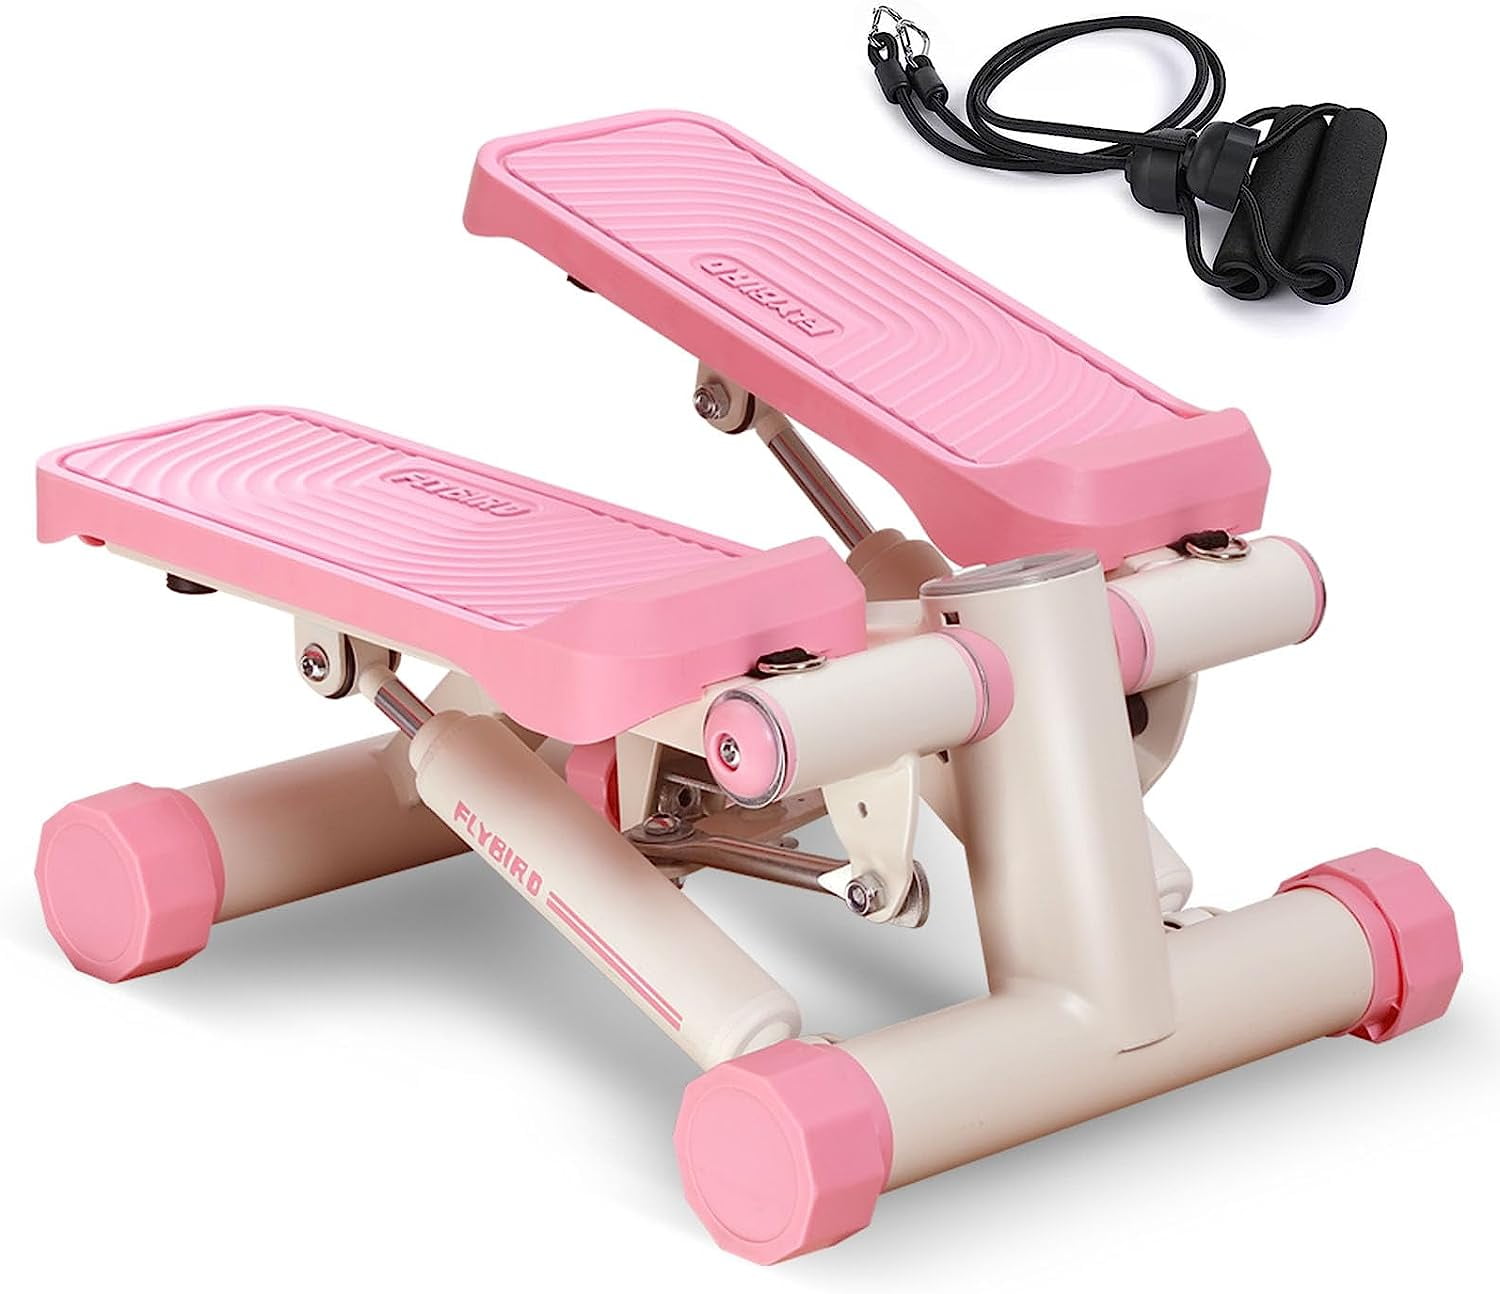 Sunny Health & Fitness Portable Total Body Exercise Mini Stair Stepper,  Climber Machine, Compact Inmotion Workout, SF-S0978